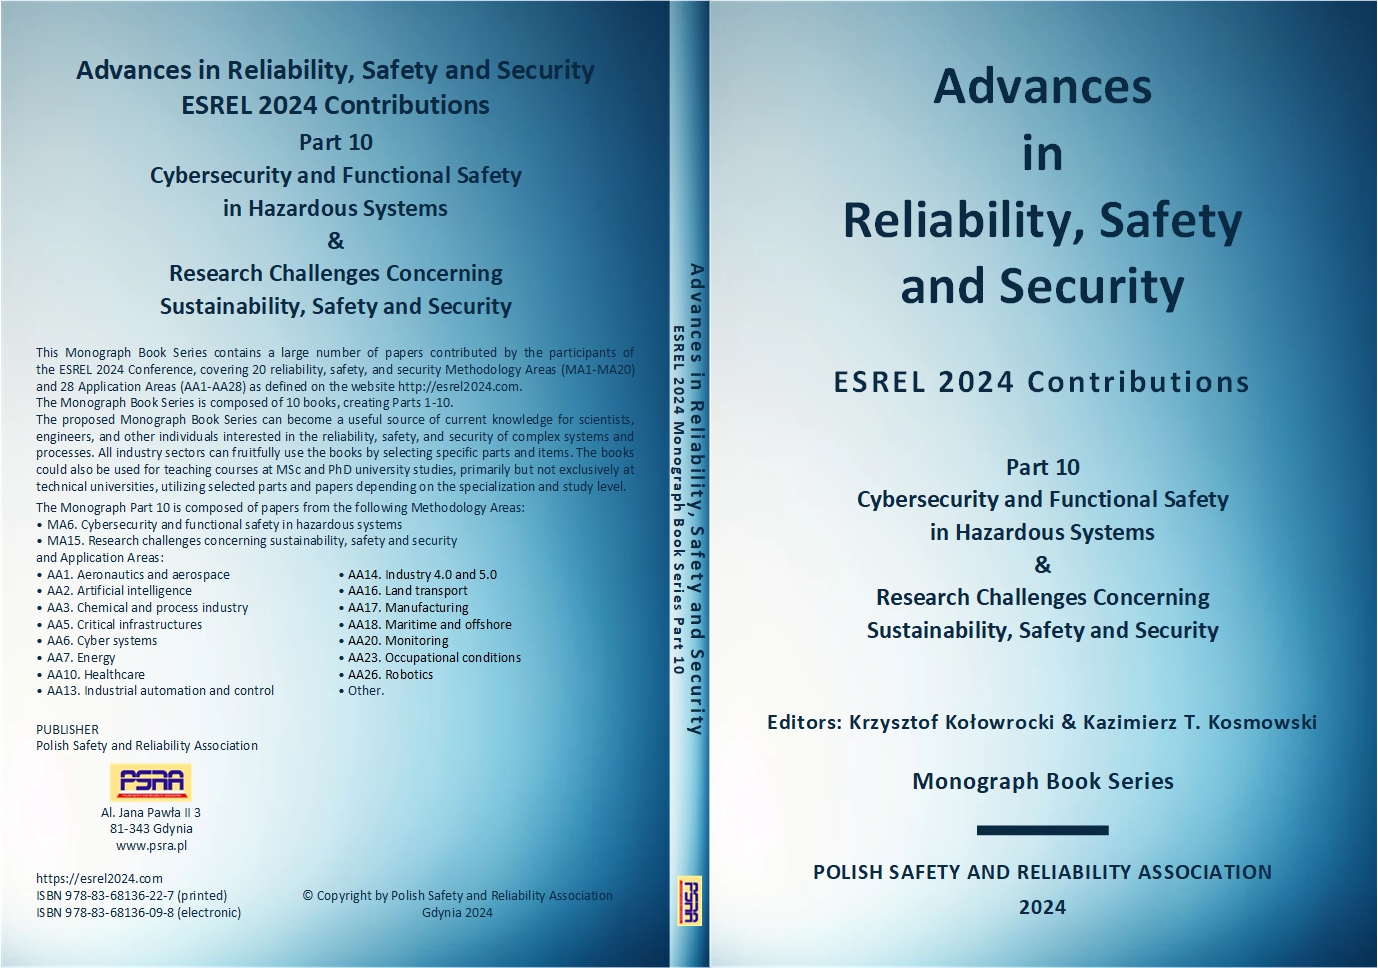 Part 10 Cybersecurity and Functional Safety in Hazardous System & Research Challenges Concerning Sustainability, Safety and Security